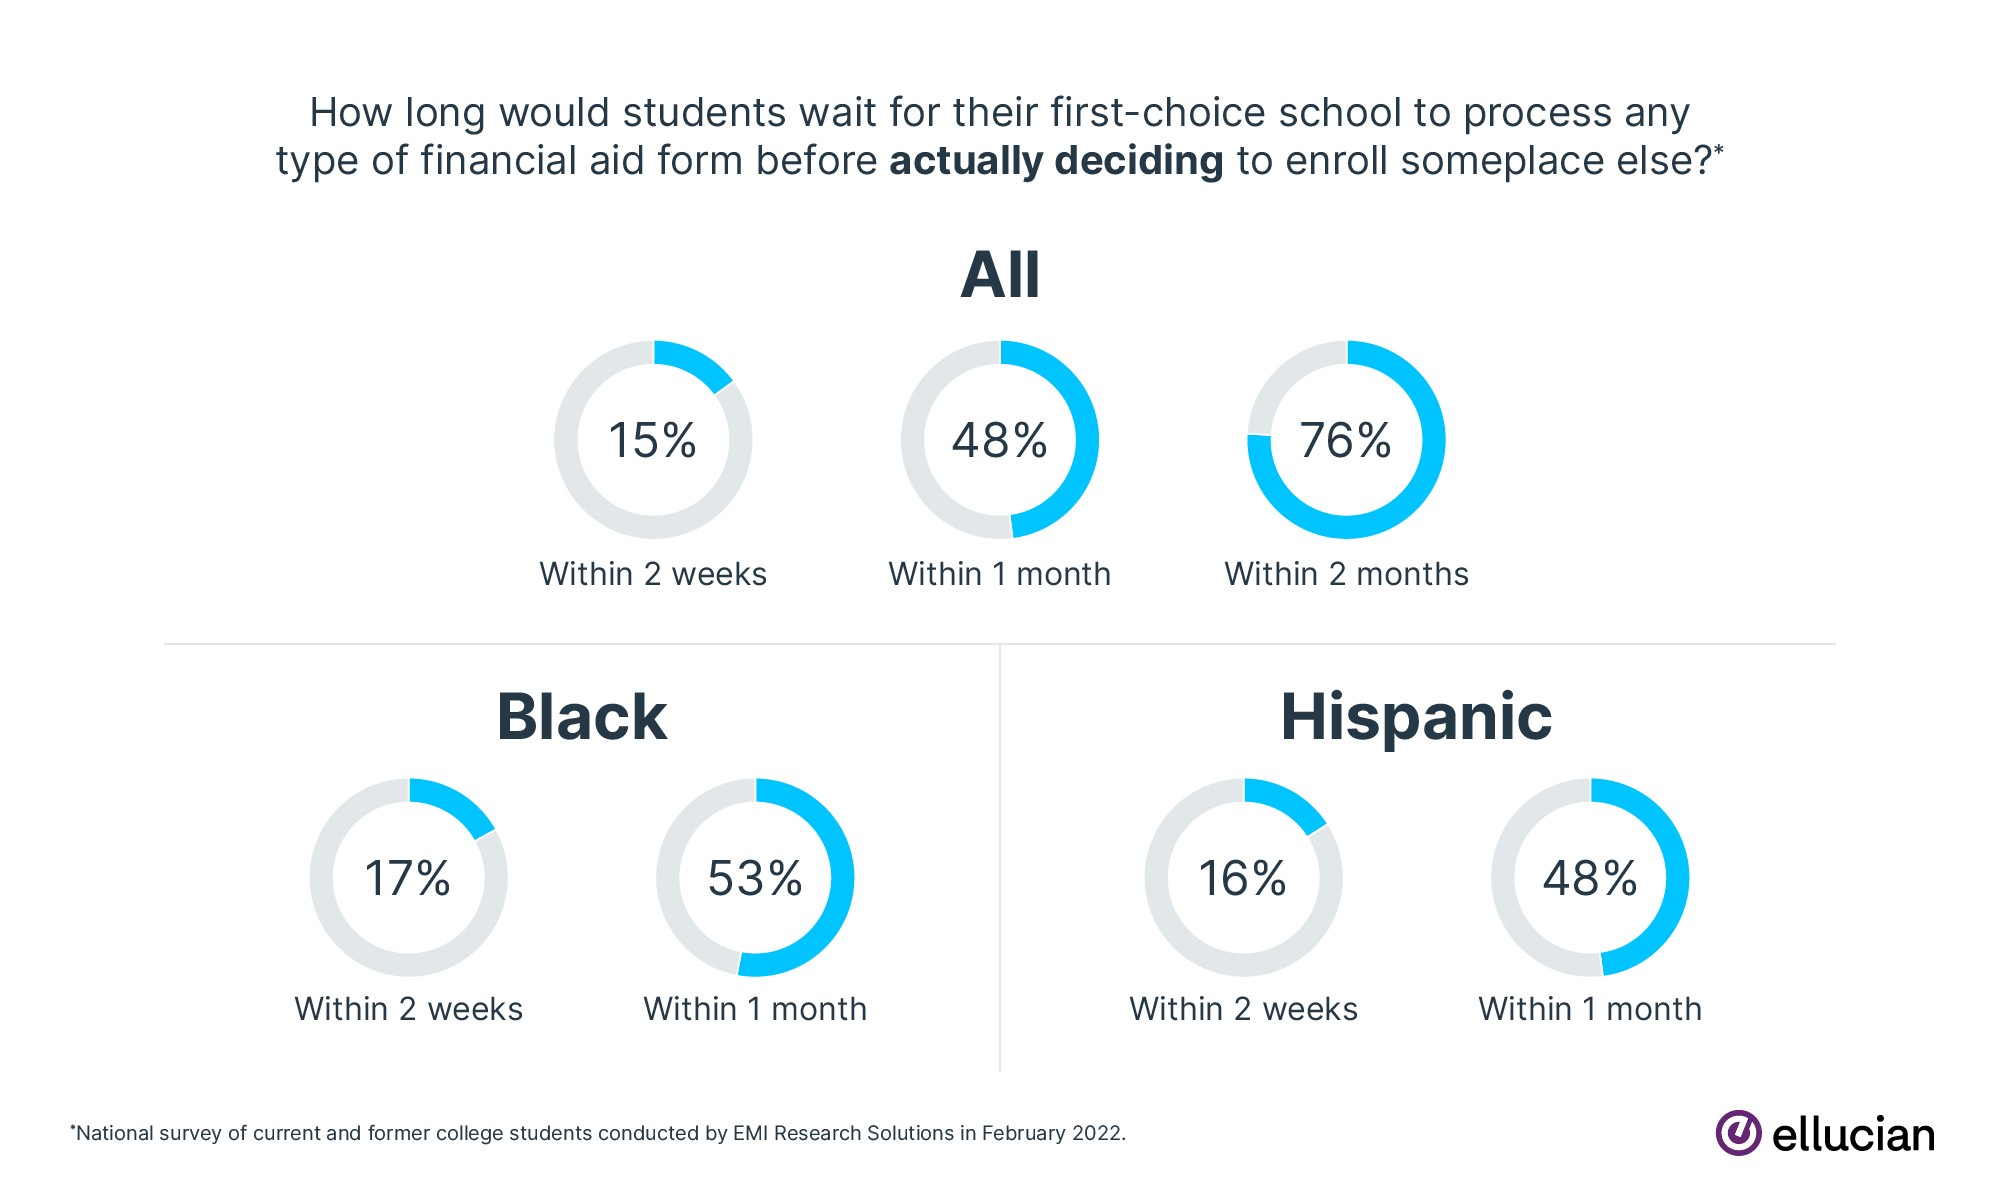 How long would students wait for their first-choice school to process any type of financial aid form before actually deciding to enroll someplace else?